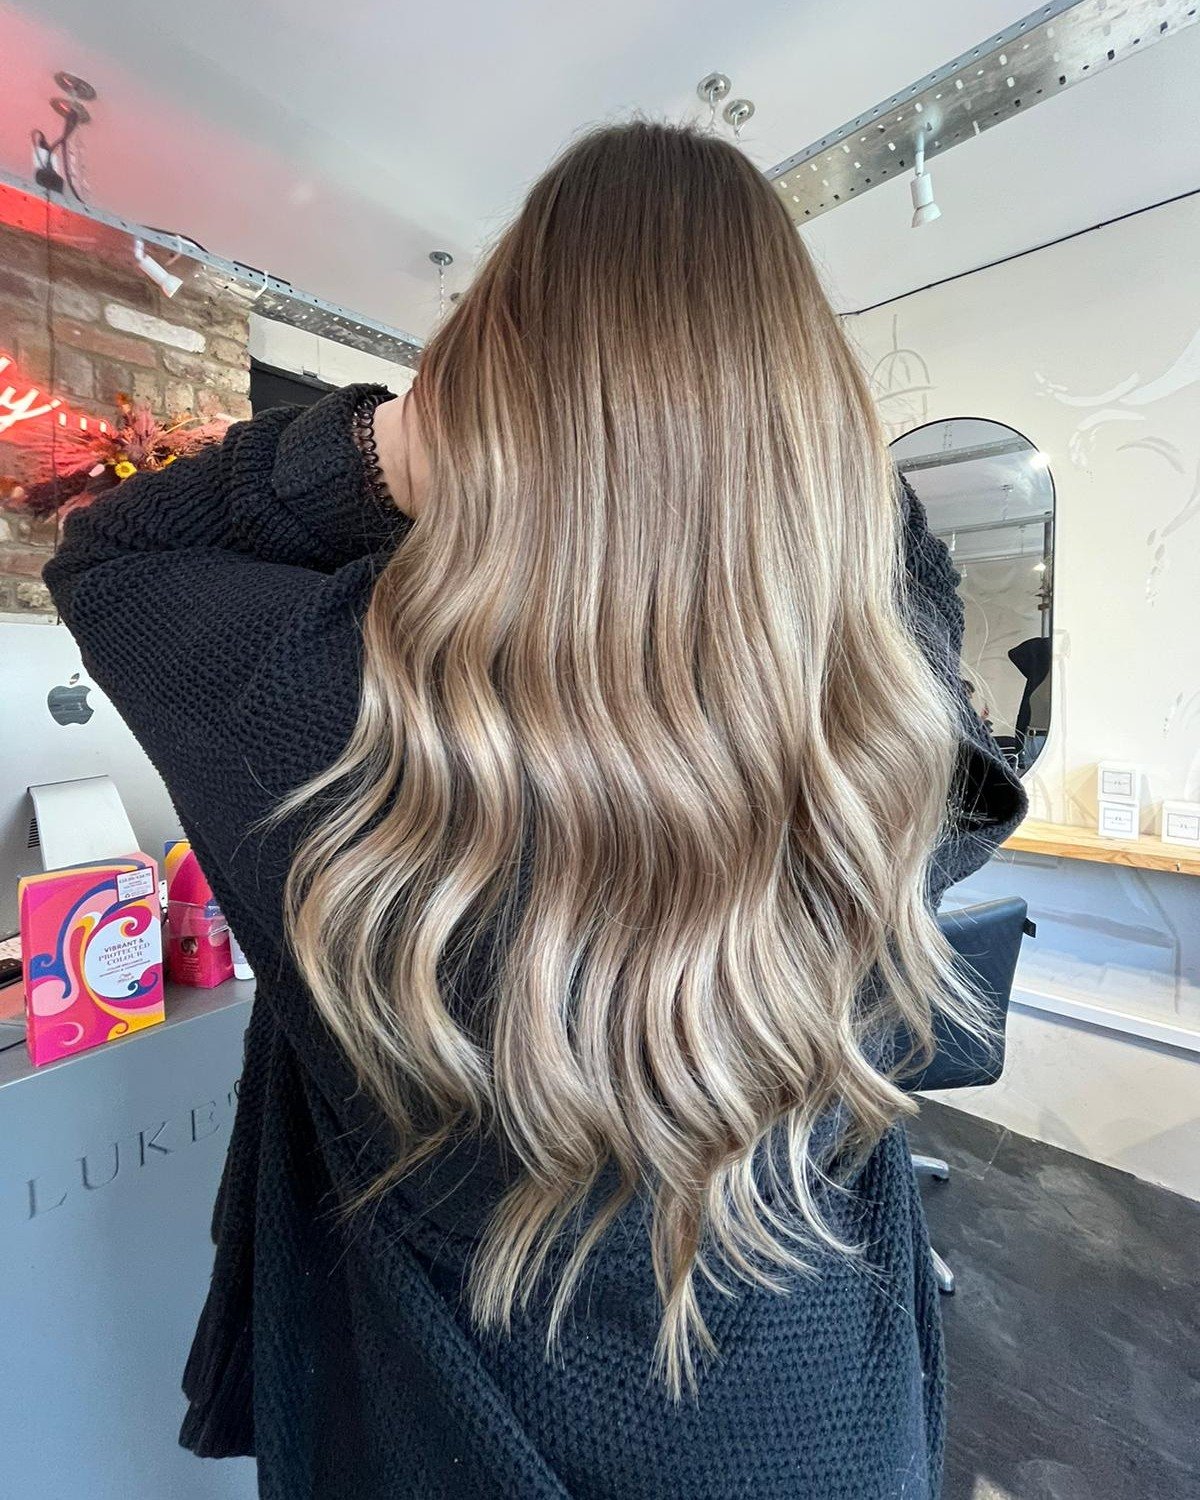 Balyage babe by @hairbymadisonmear_ ✨

Full head balayage, all over gloss, cut and style using @wella 💇&zwj;♀️

.
.
.

#worthing #westsussex #sussex #hair #hairdresser #hairstyle #blondehair #wavyhair #hairinspo #hairtransformation #hairgoals #wella